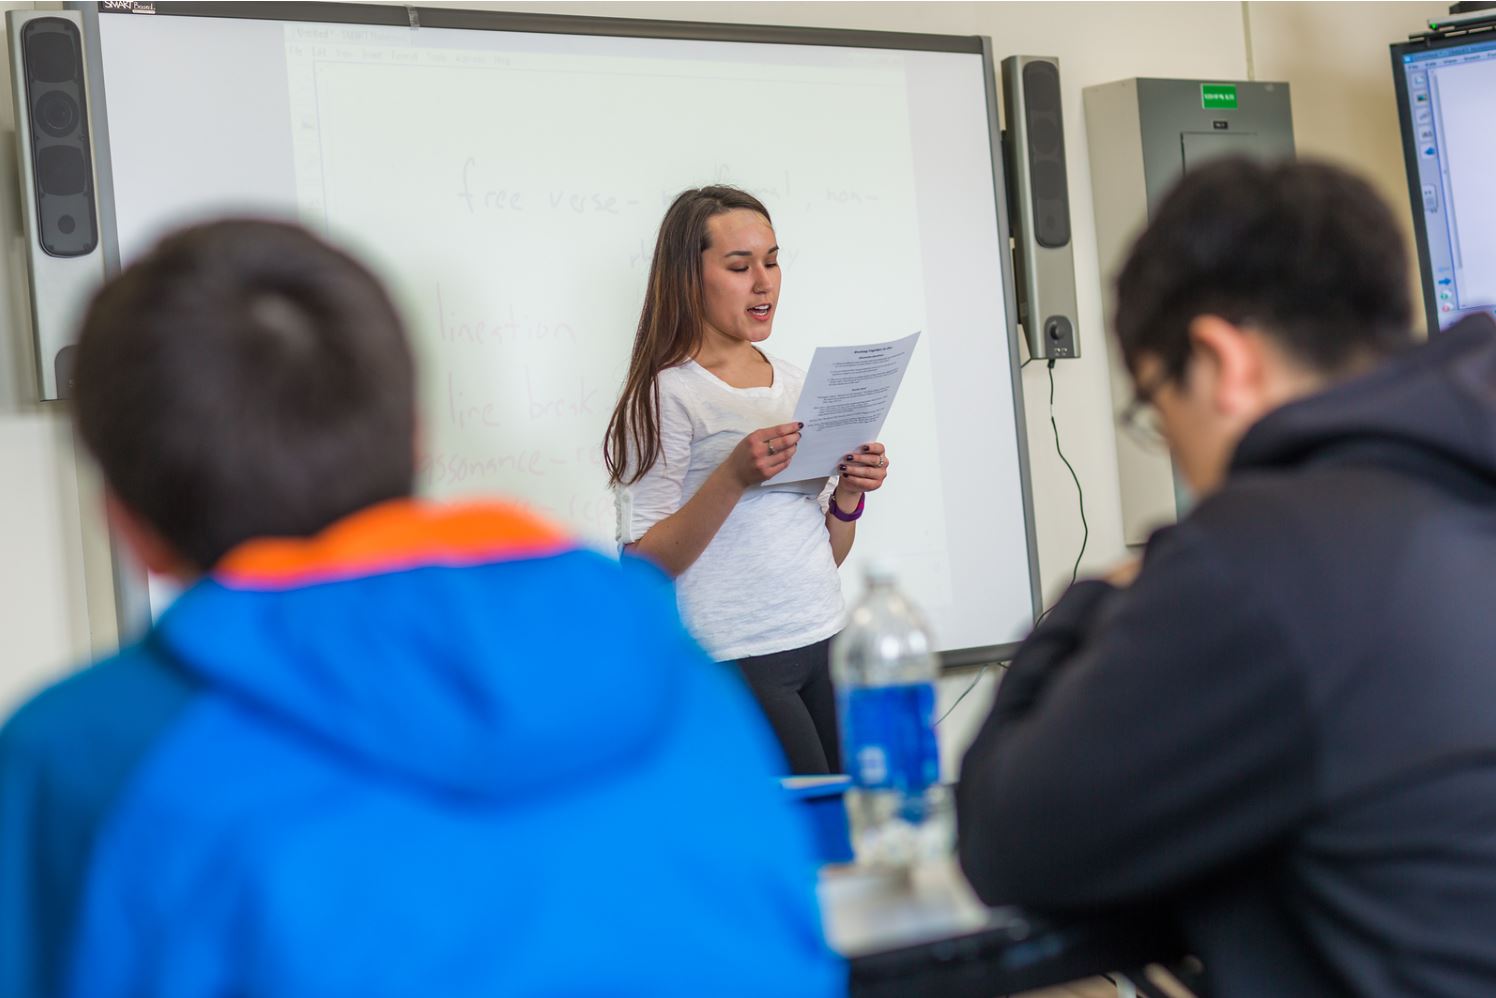 Jesslyn McGowan from Bethel presents to her English class at UAF's Kuskokwim Campus in Bethel.